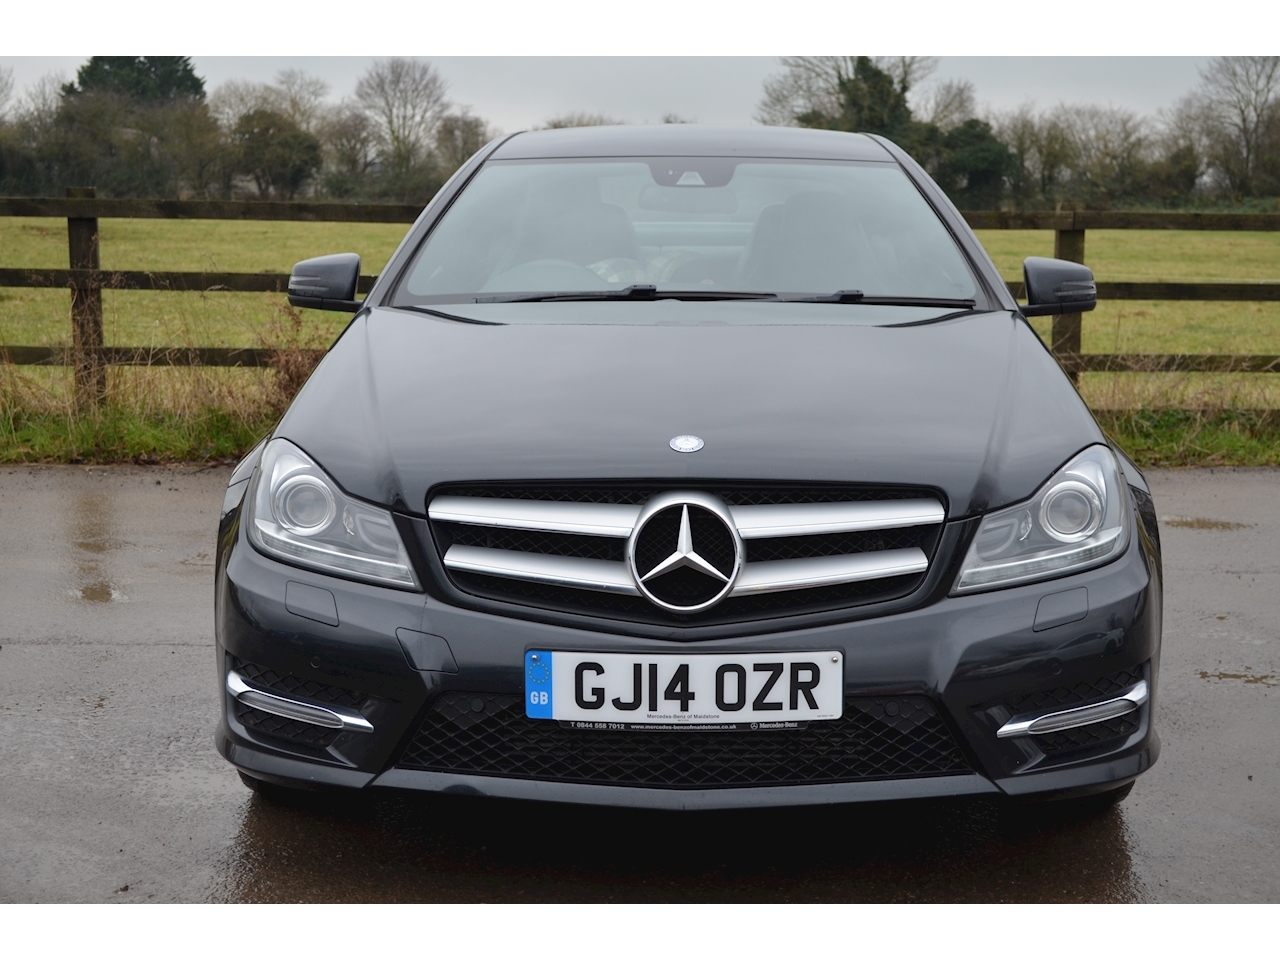 C250 Cdi Blueefficiency Amg Sport 2.1 2dr Coupe Manual Diesel